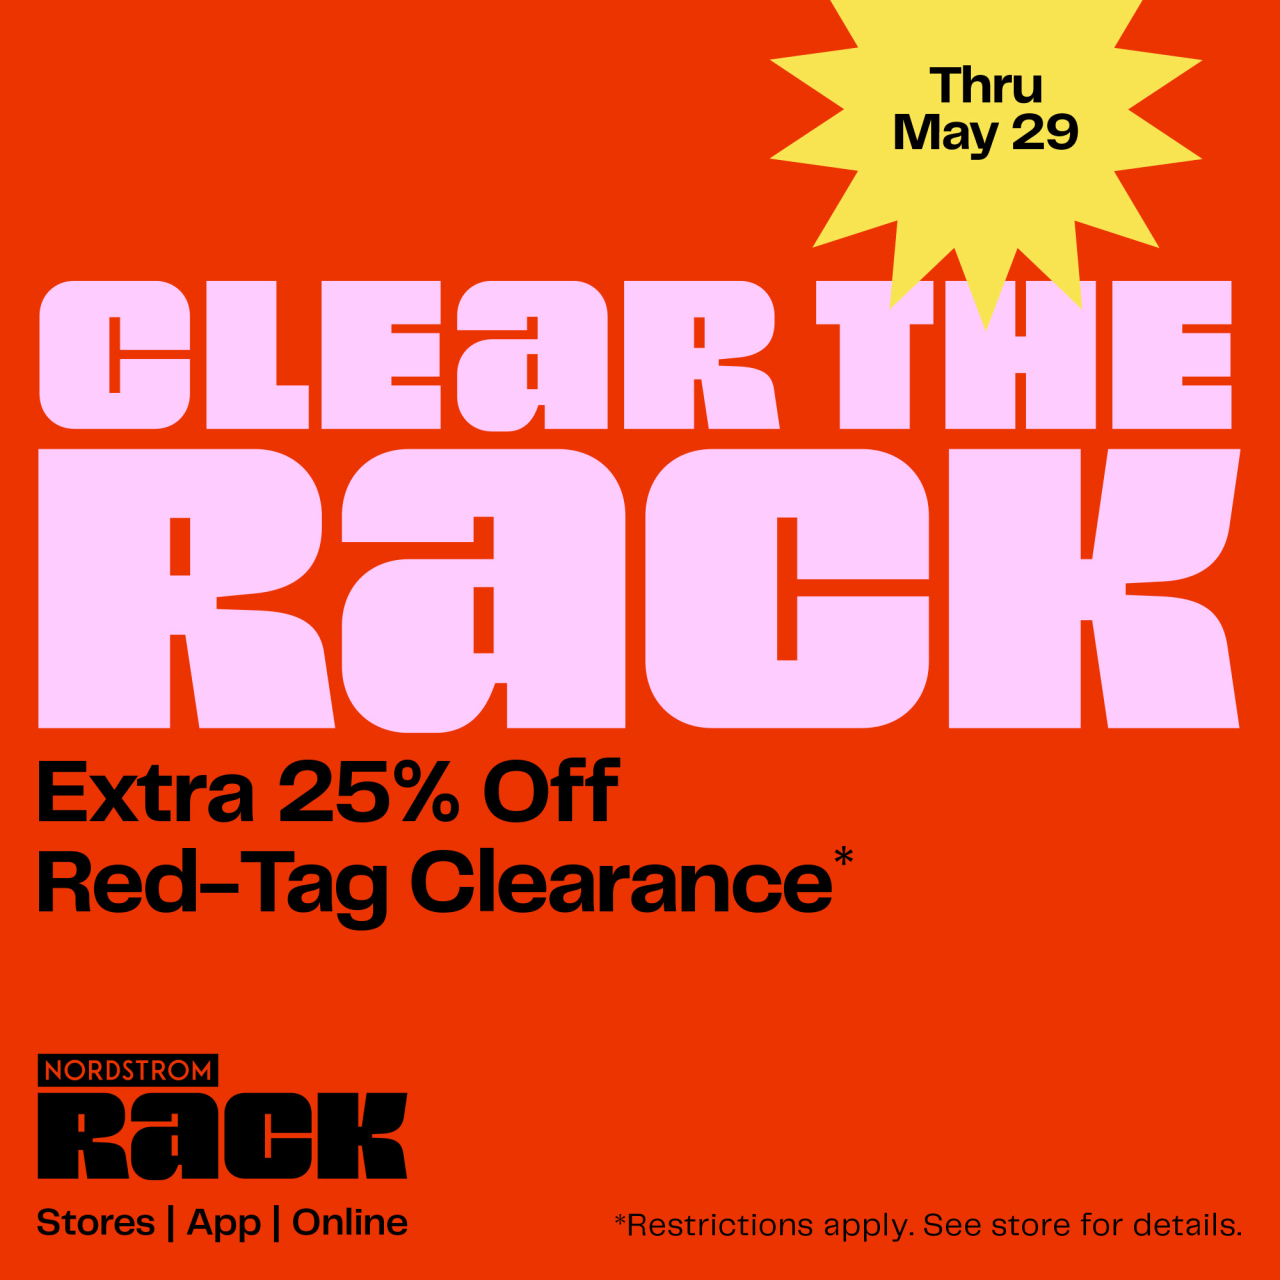 Clear the rack extra 25% off red-tag clearance